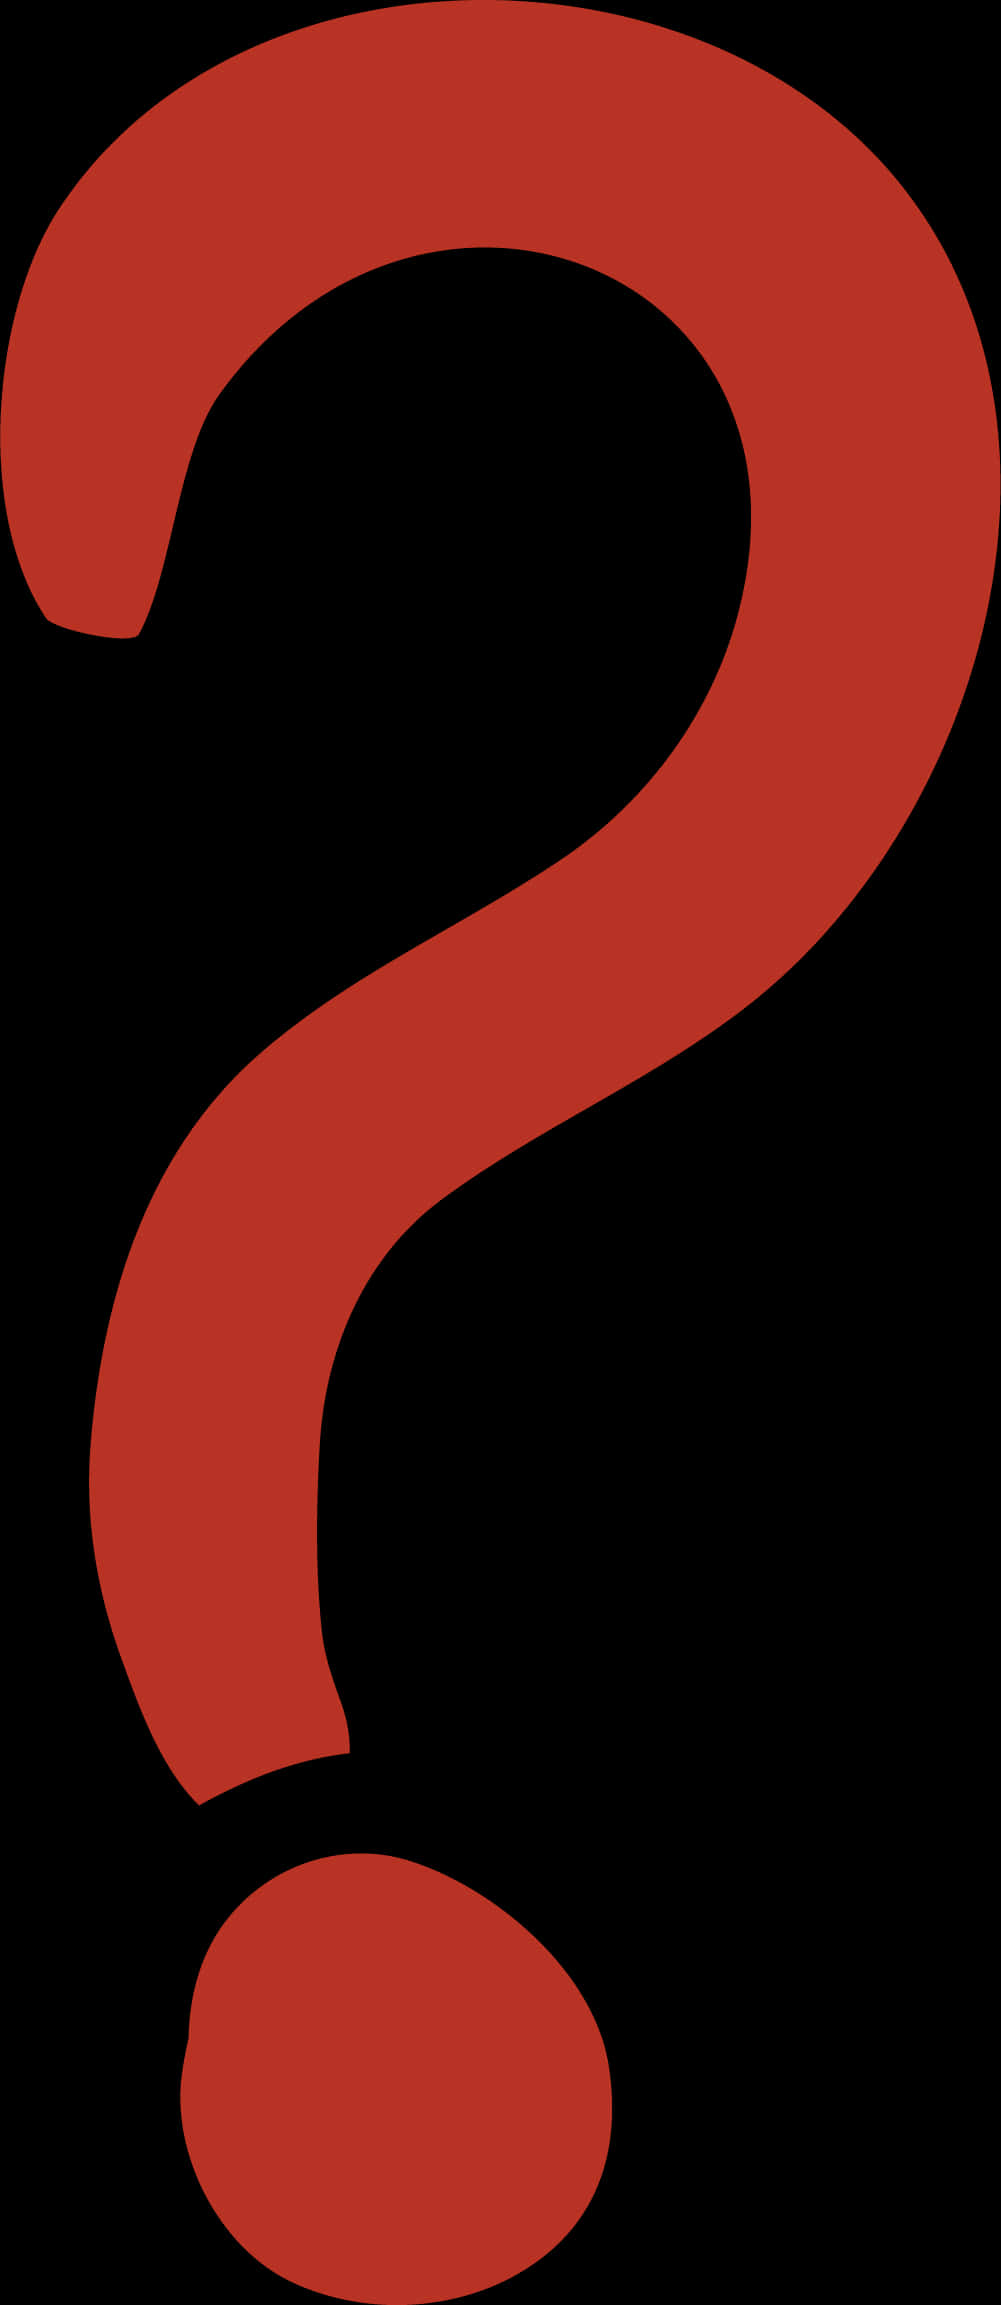 A Red Curved Line On A Black Background